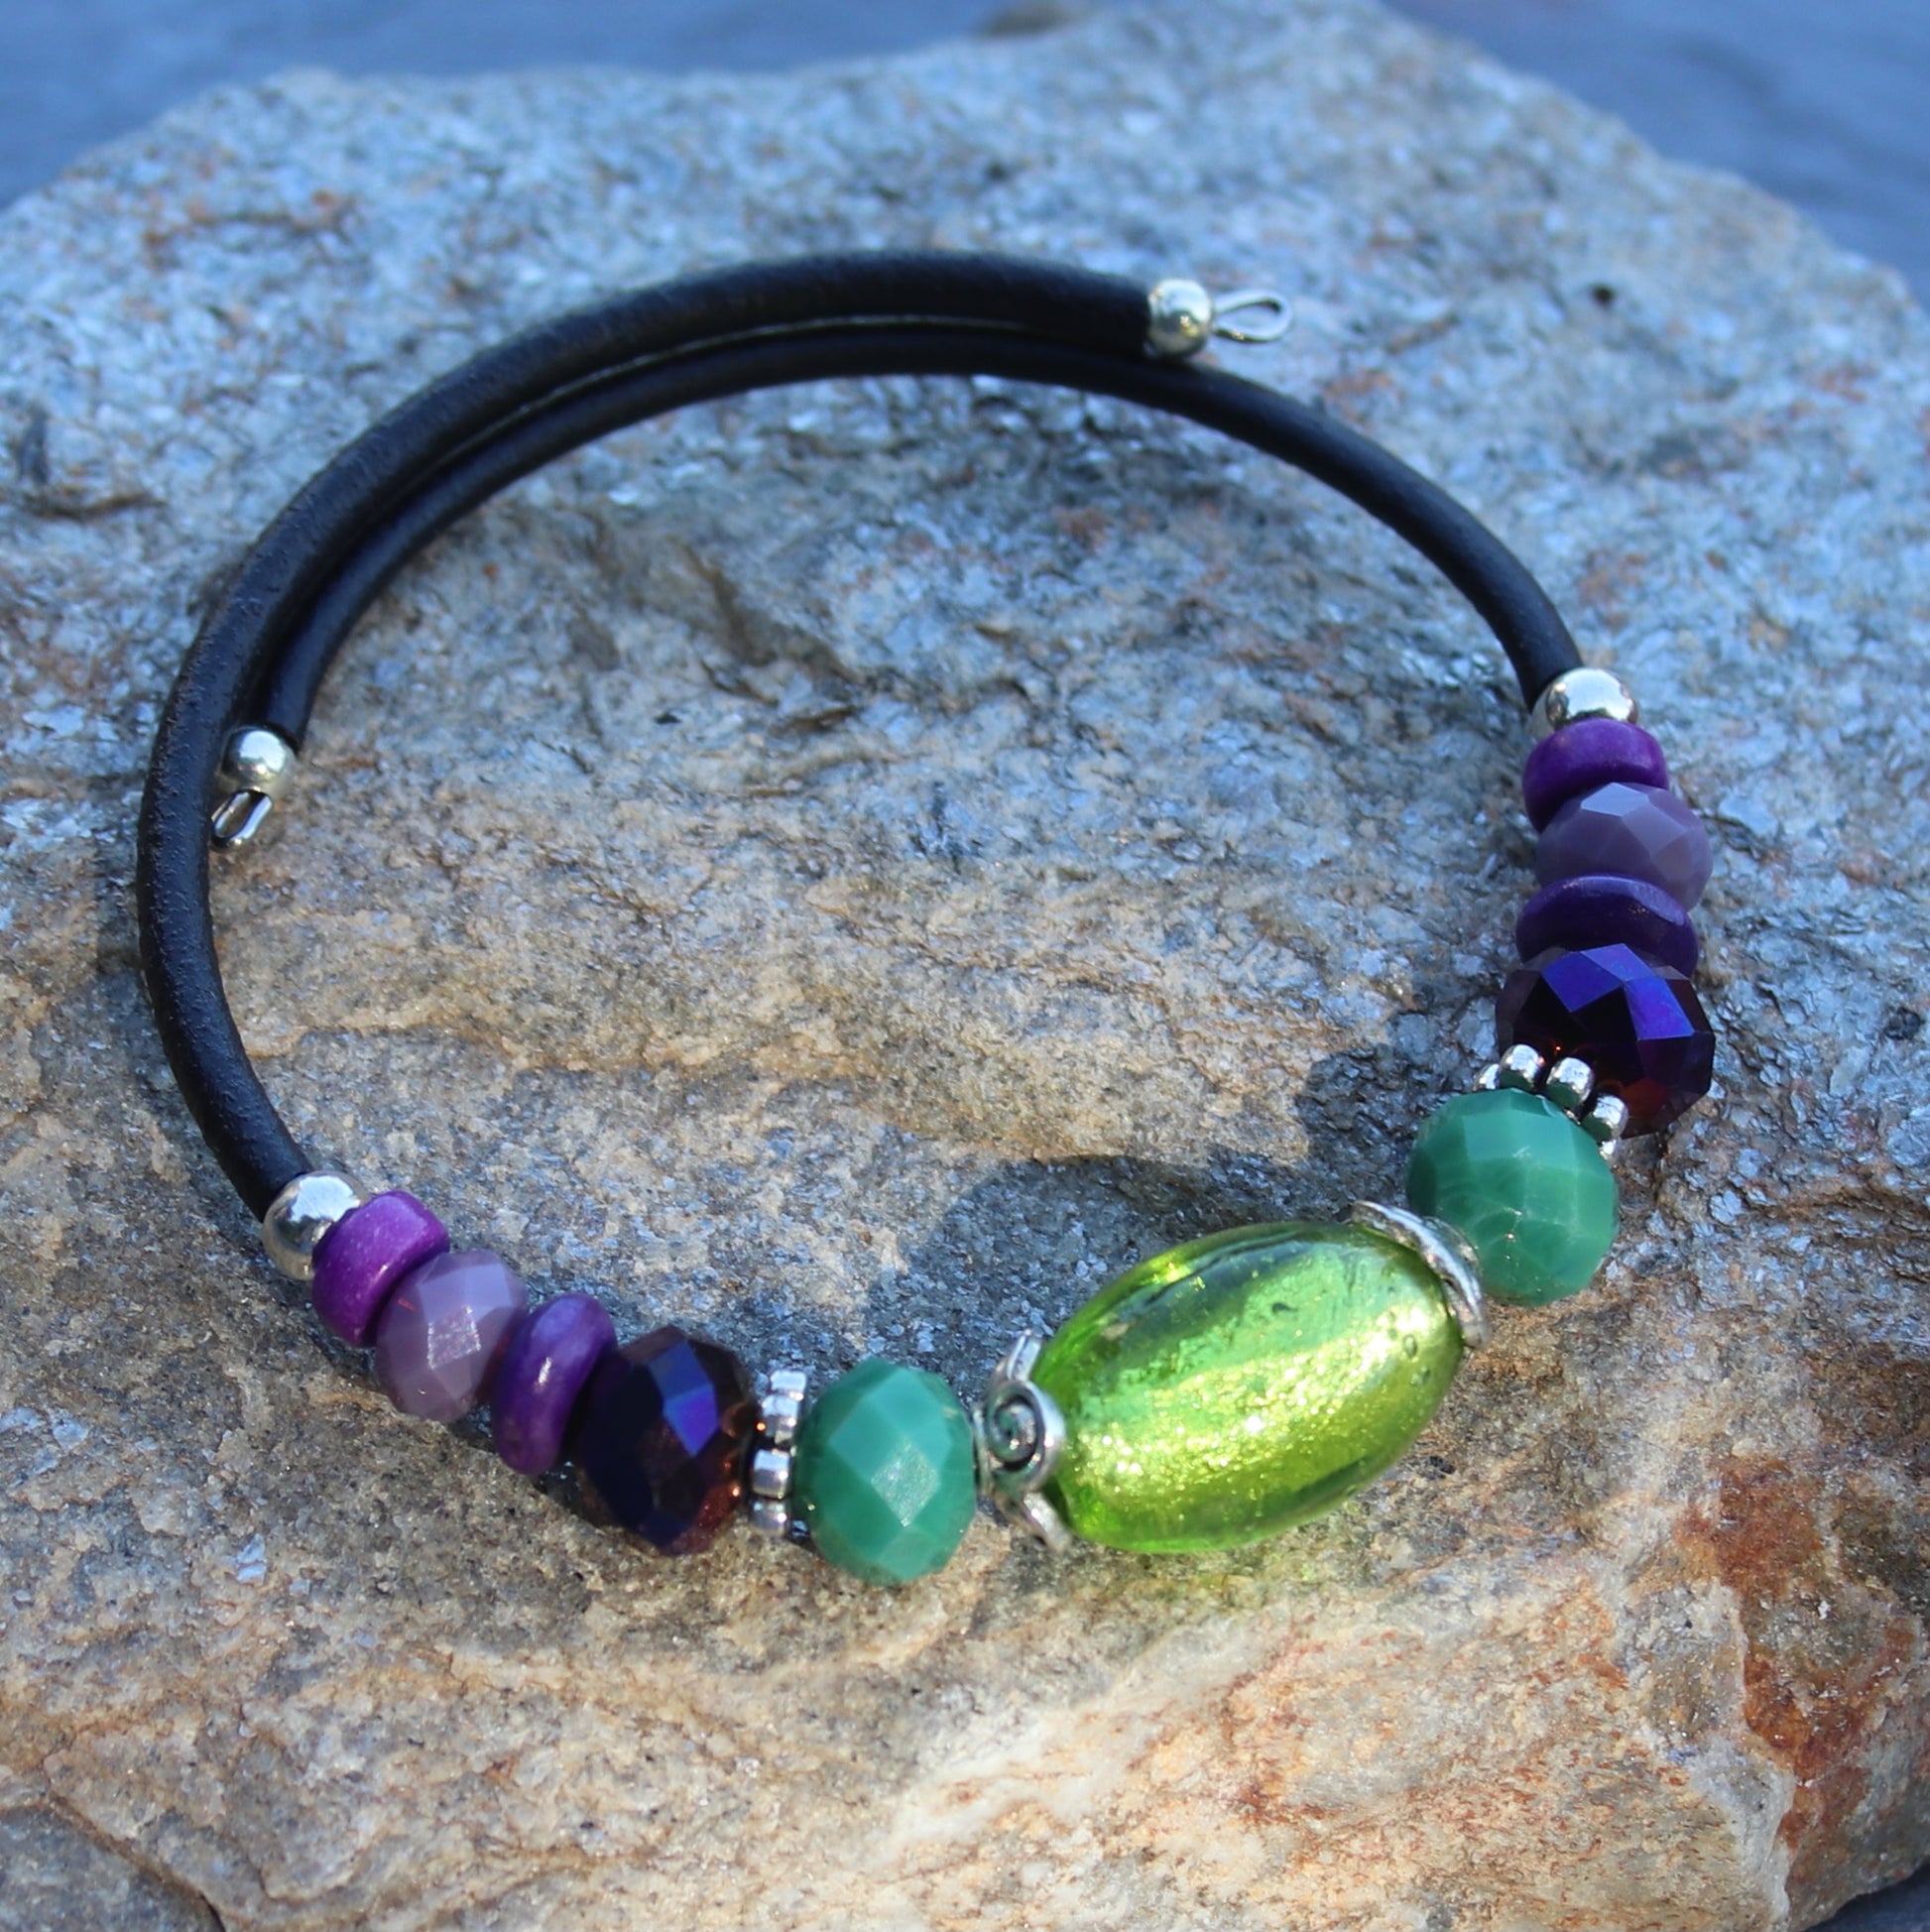 Wrap Bracelet - bright green glass over foil center bead with mix green and purple beads